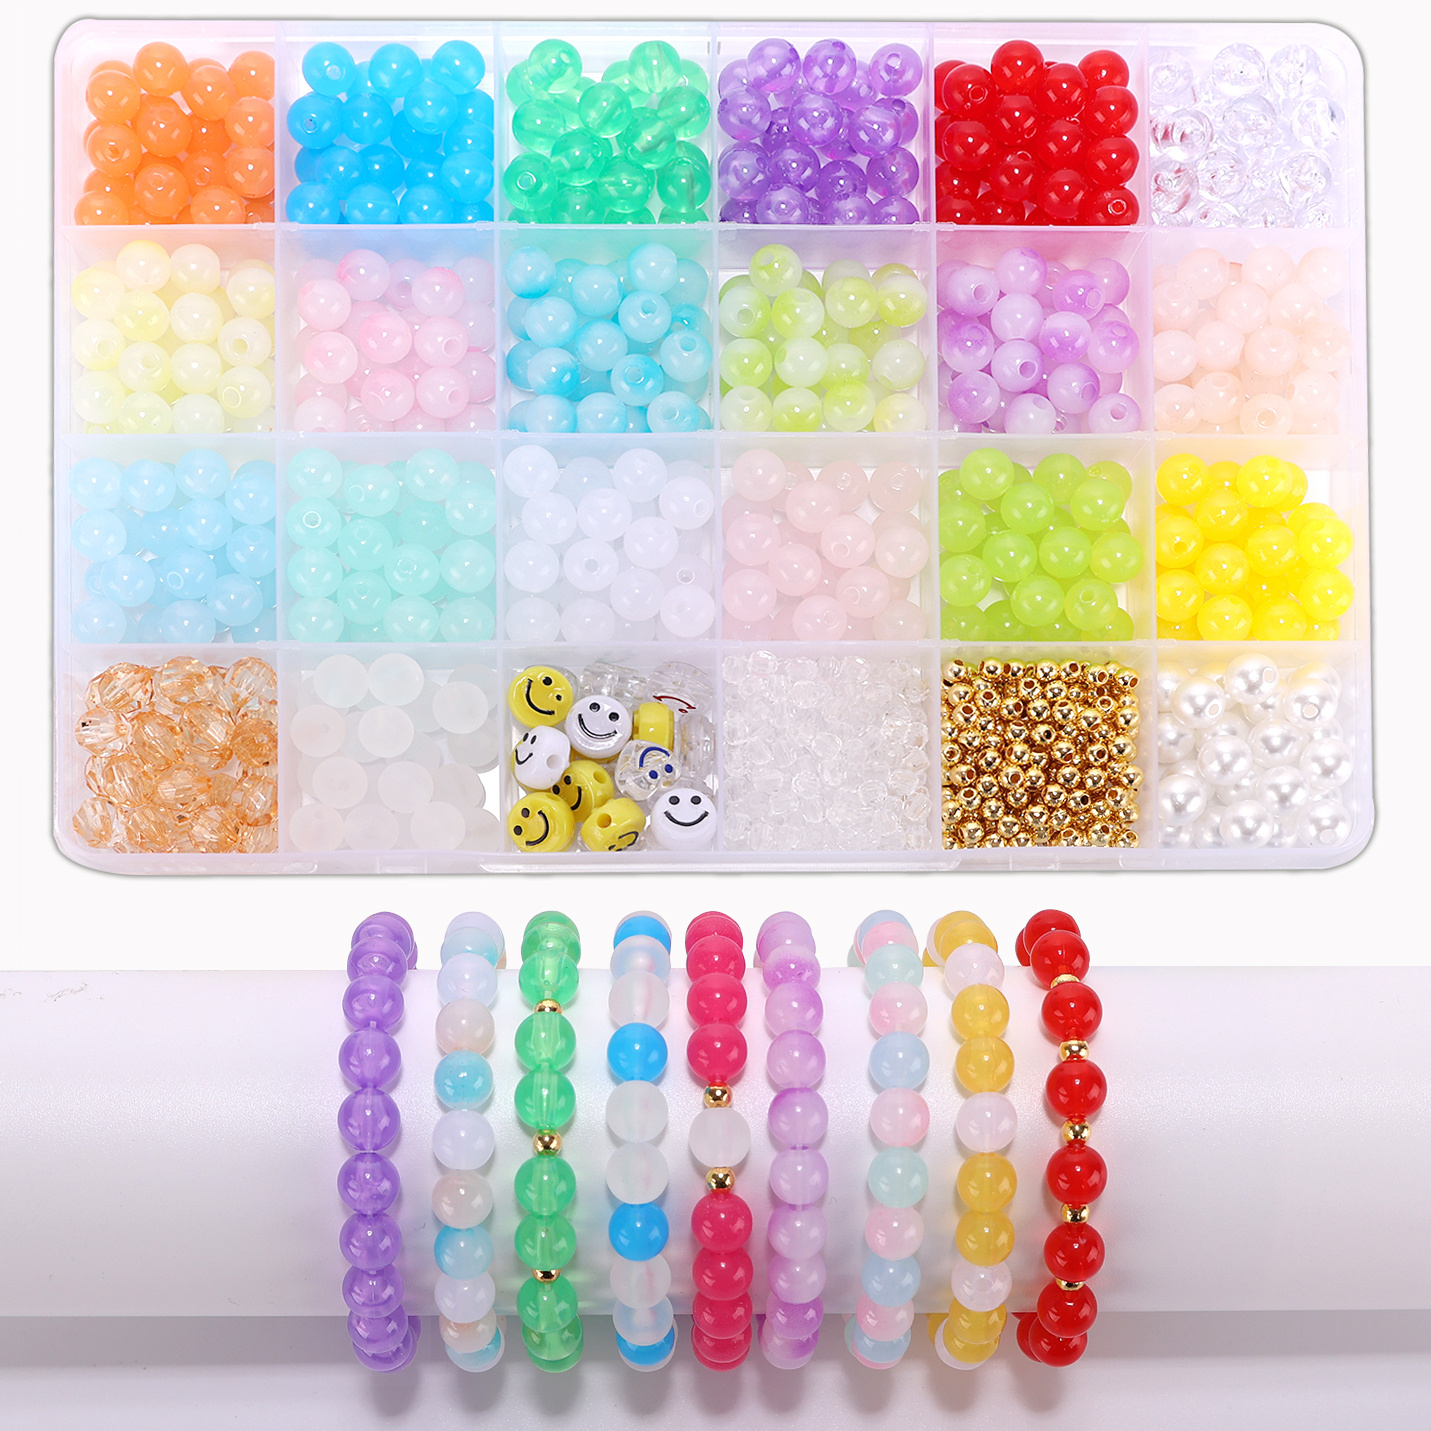 5572Pcs 24 Color Glass Beads Bracelets Kit 14 Color Acrylic Round Beads  with Bracelet Rope Round Colorful Letter Beads Heart - AliExpress